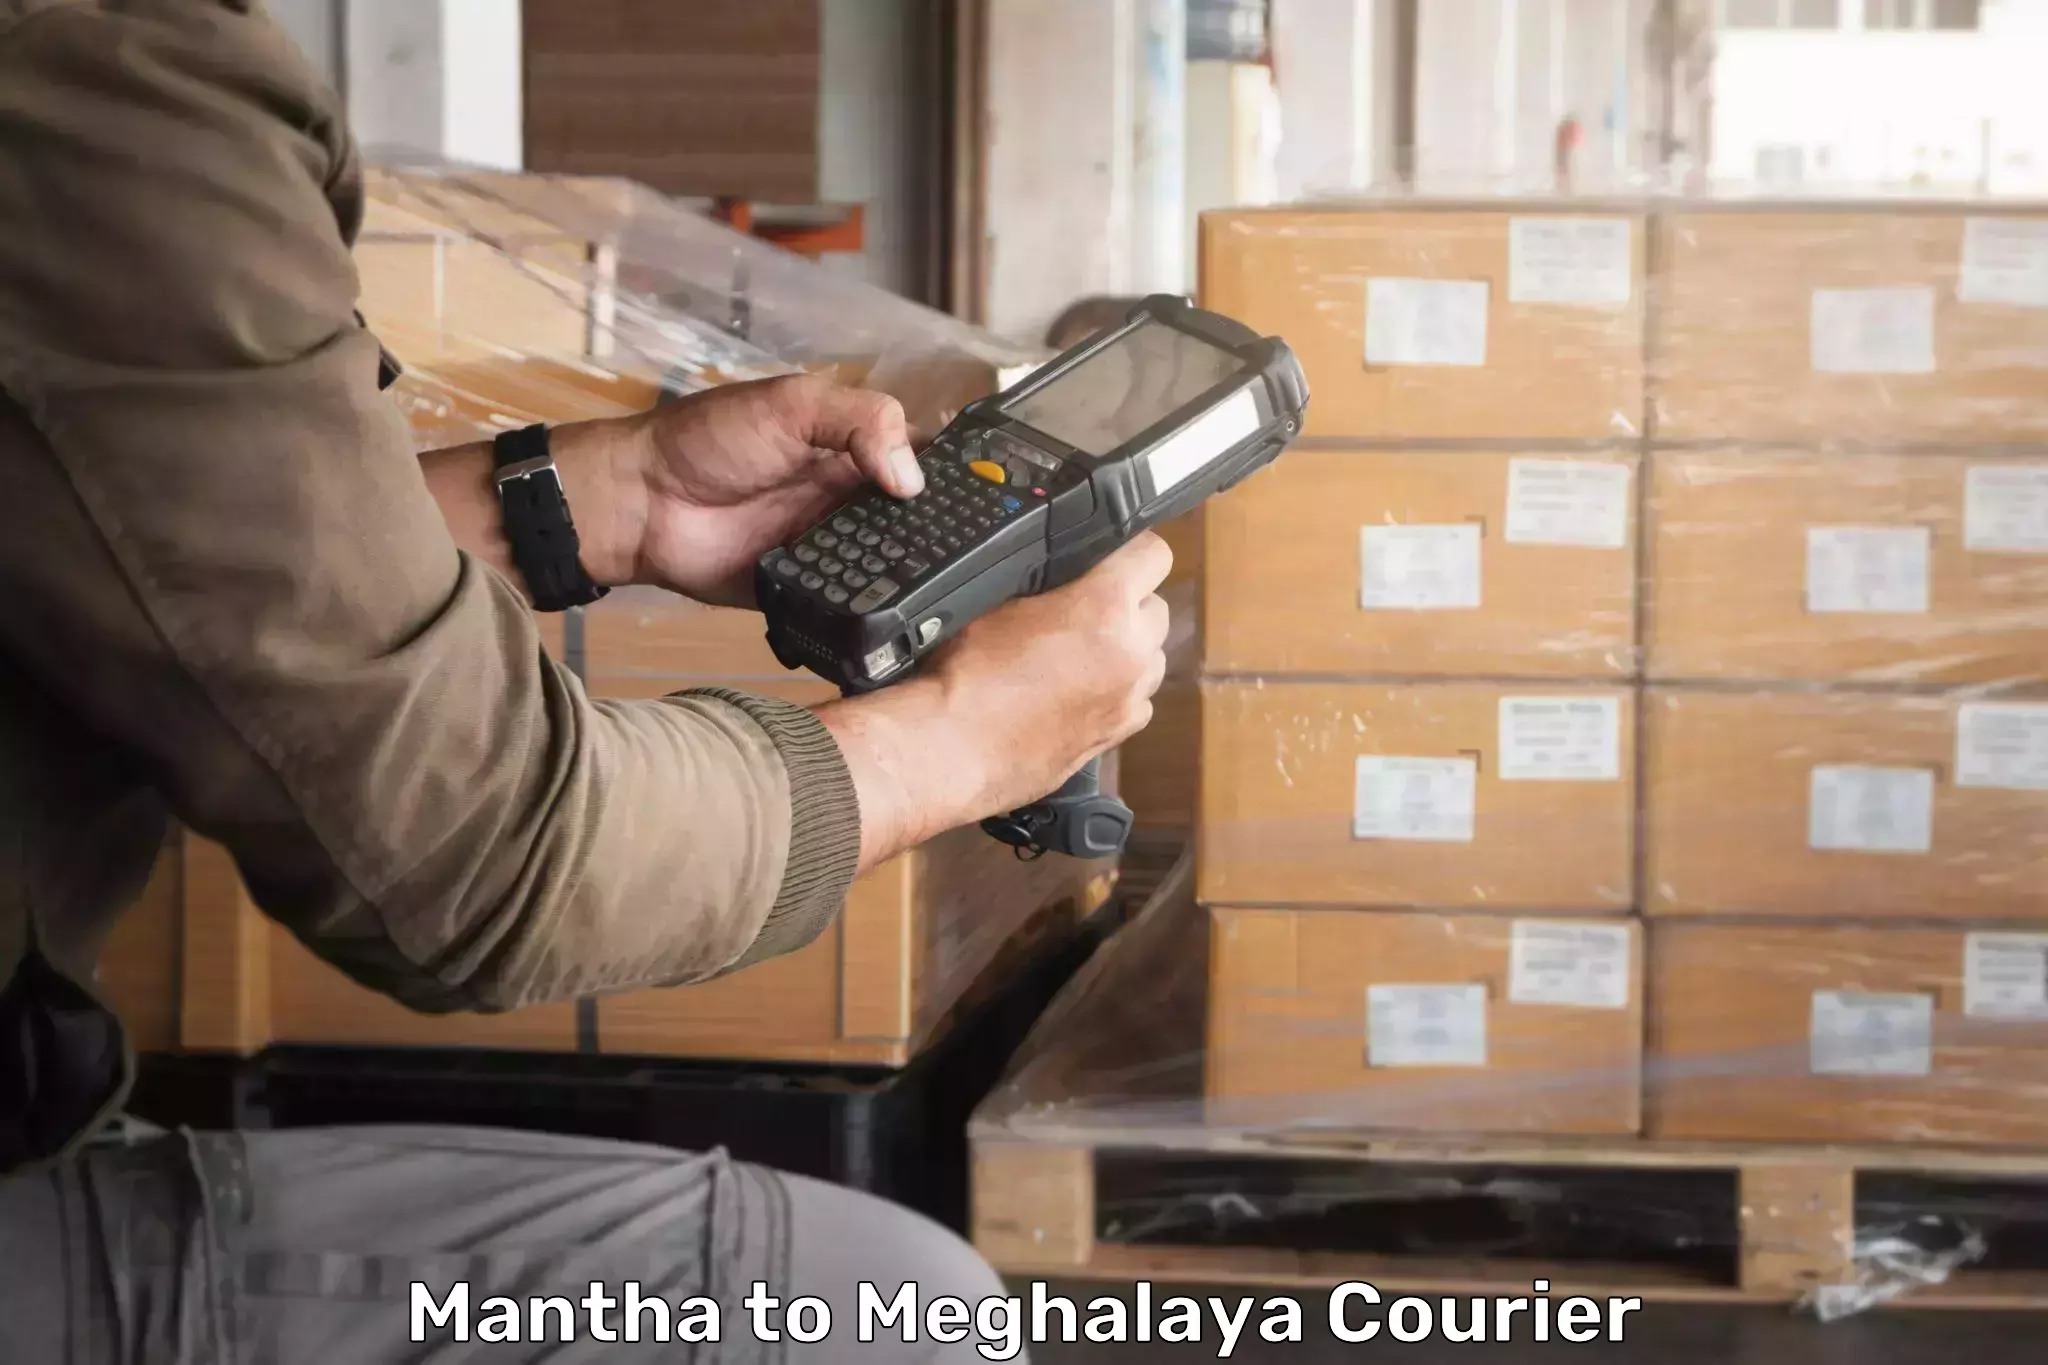 Courier service efficiency Mantha to Nongpoh